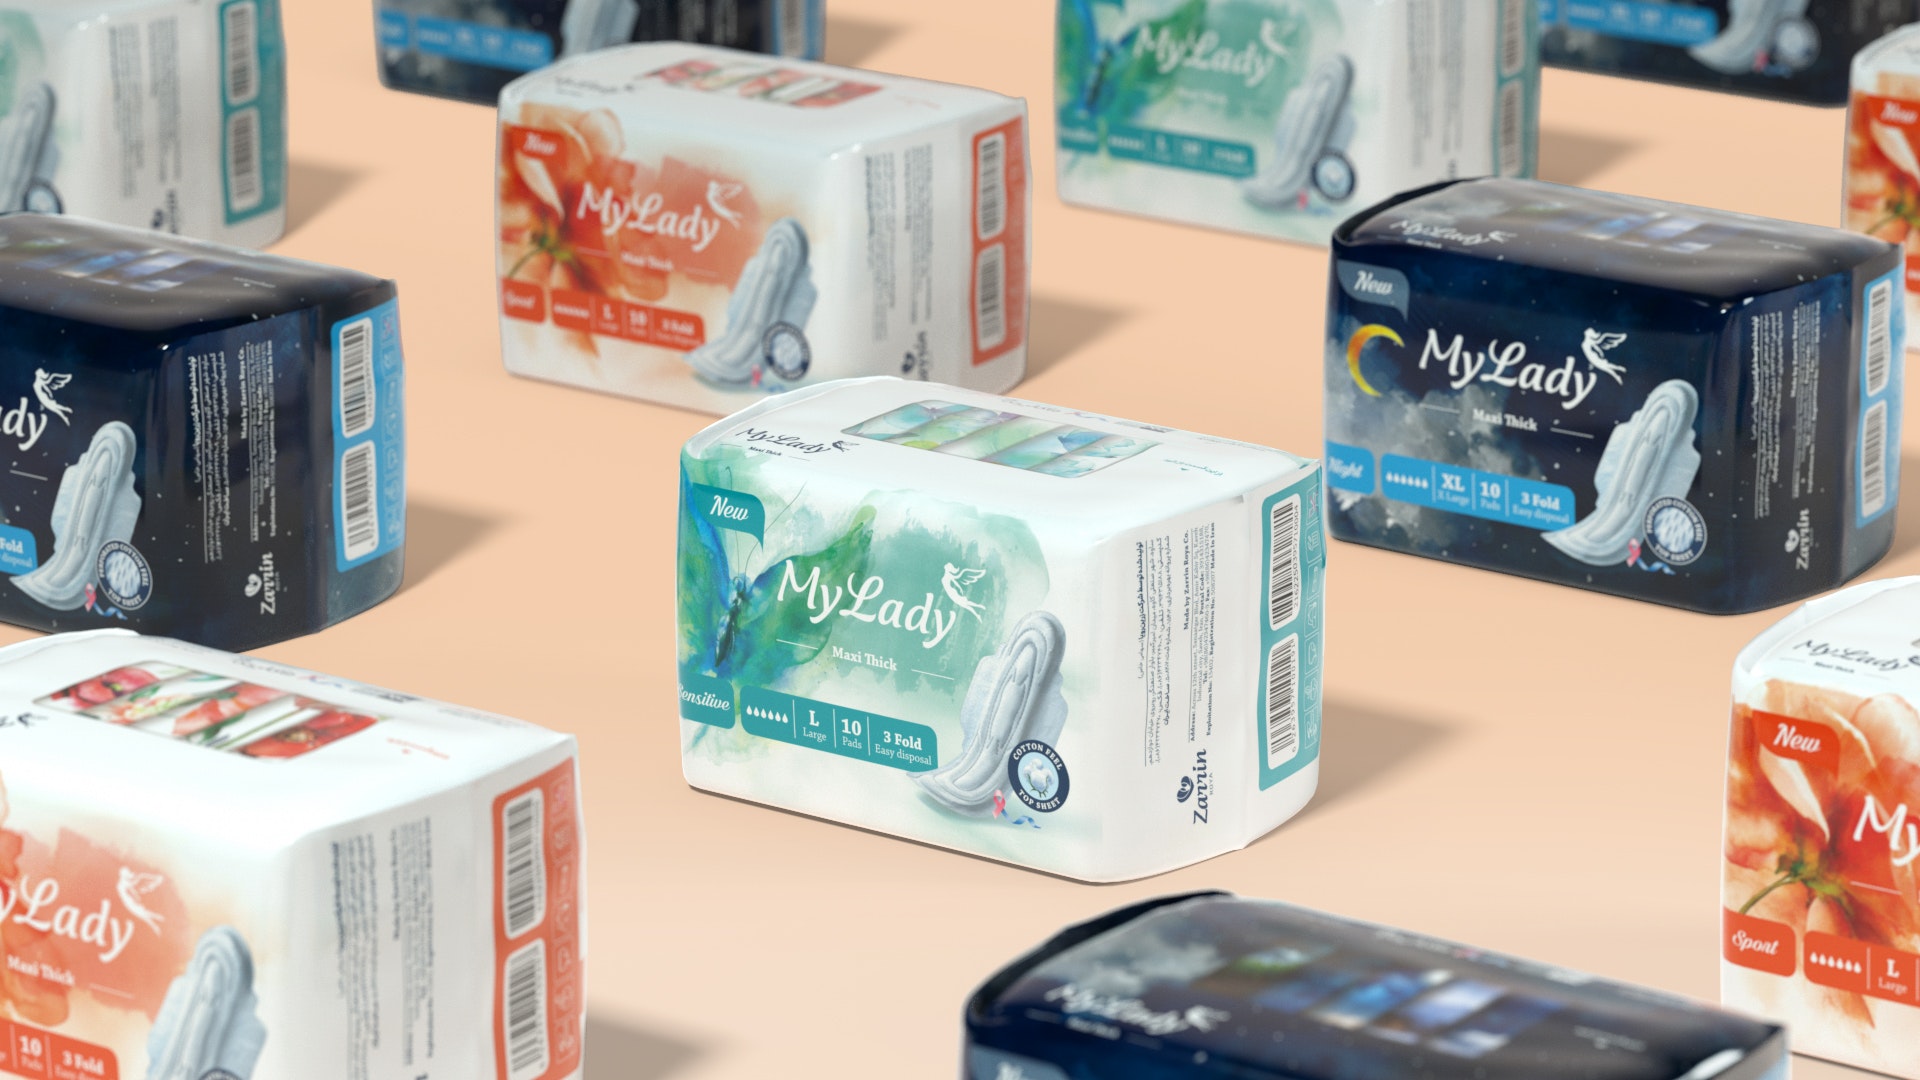 MyLady-Period is Normal Challenging Period-Shaming Through Better Designed Sanitary Pads Packaging